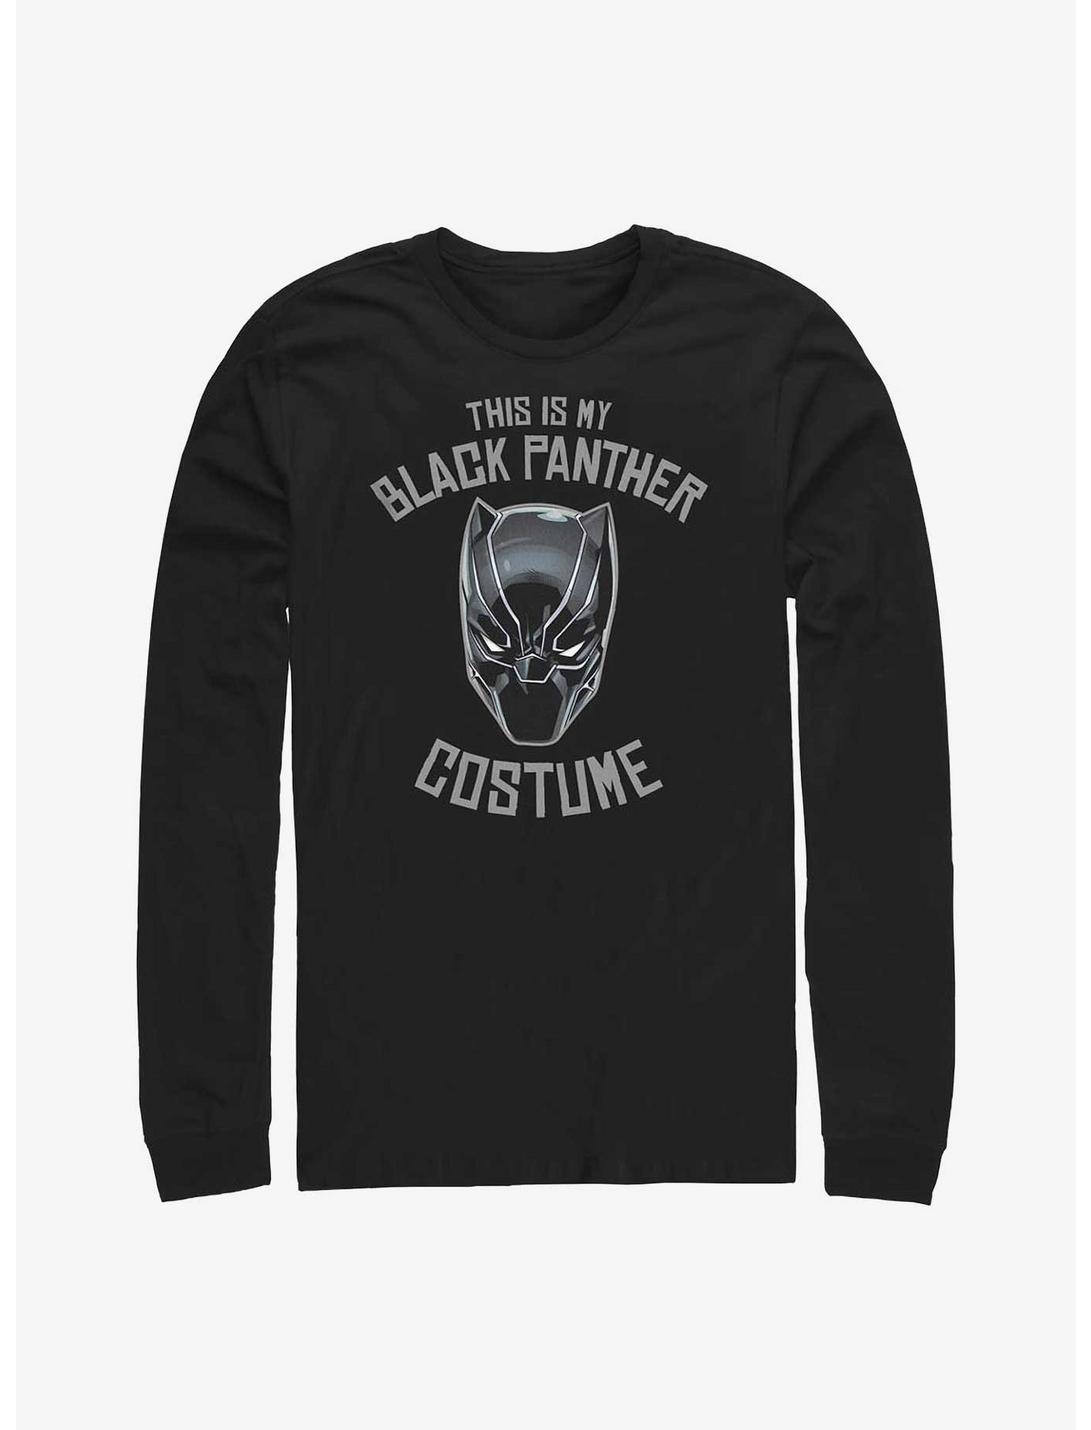 Marvel The Black Panther This Is My Costume Long-Sleeve T-Shirt, BLACK, hi-res